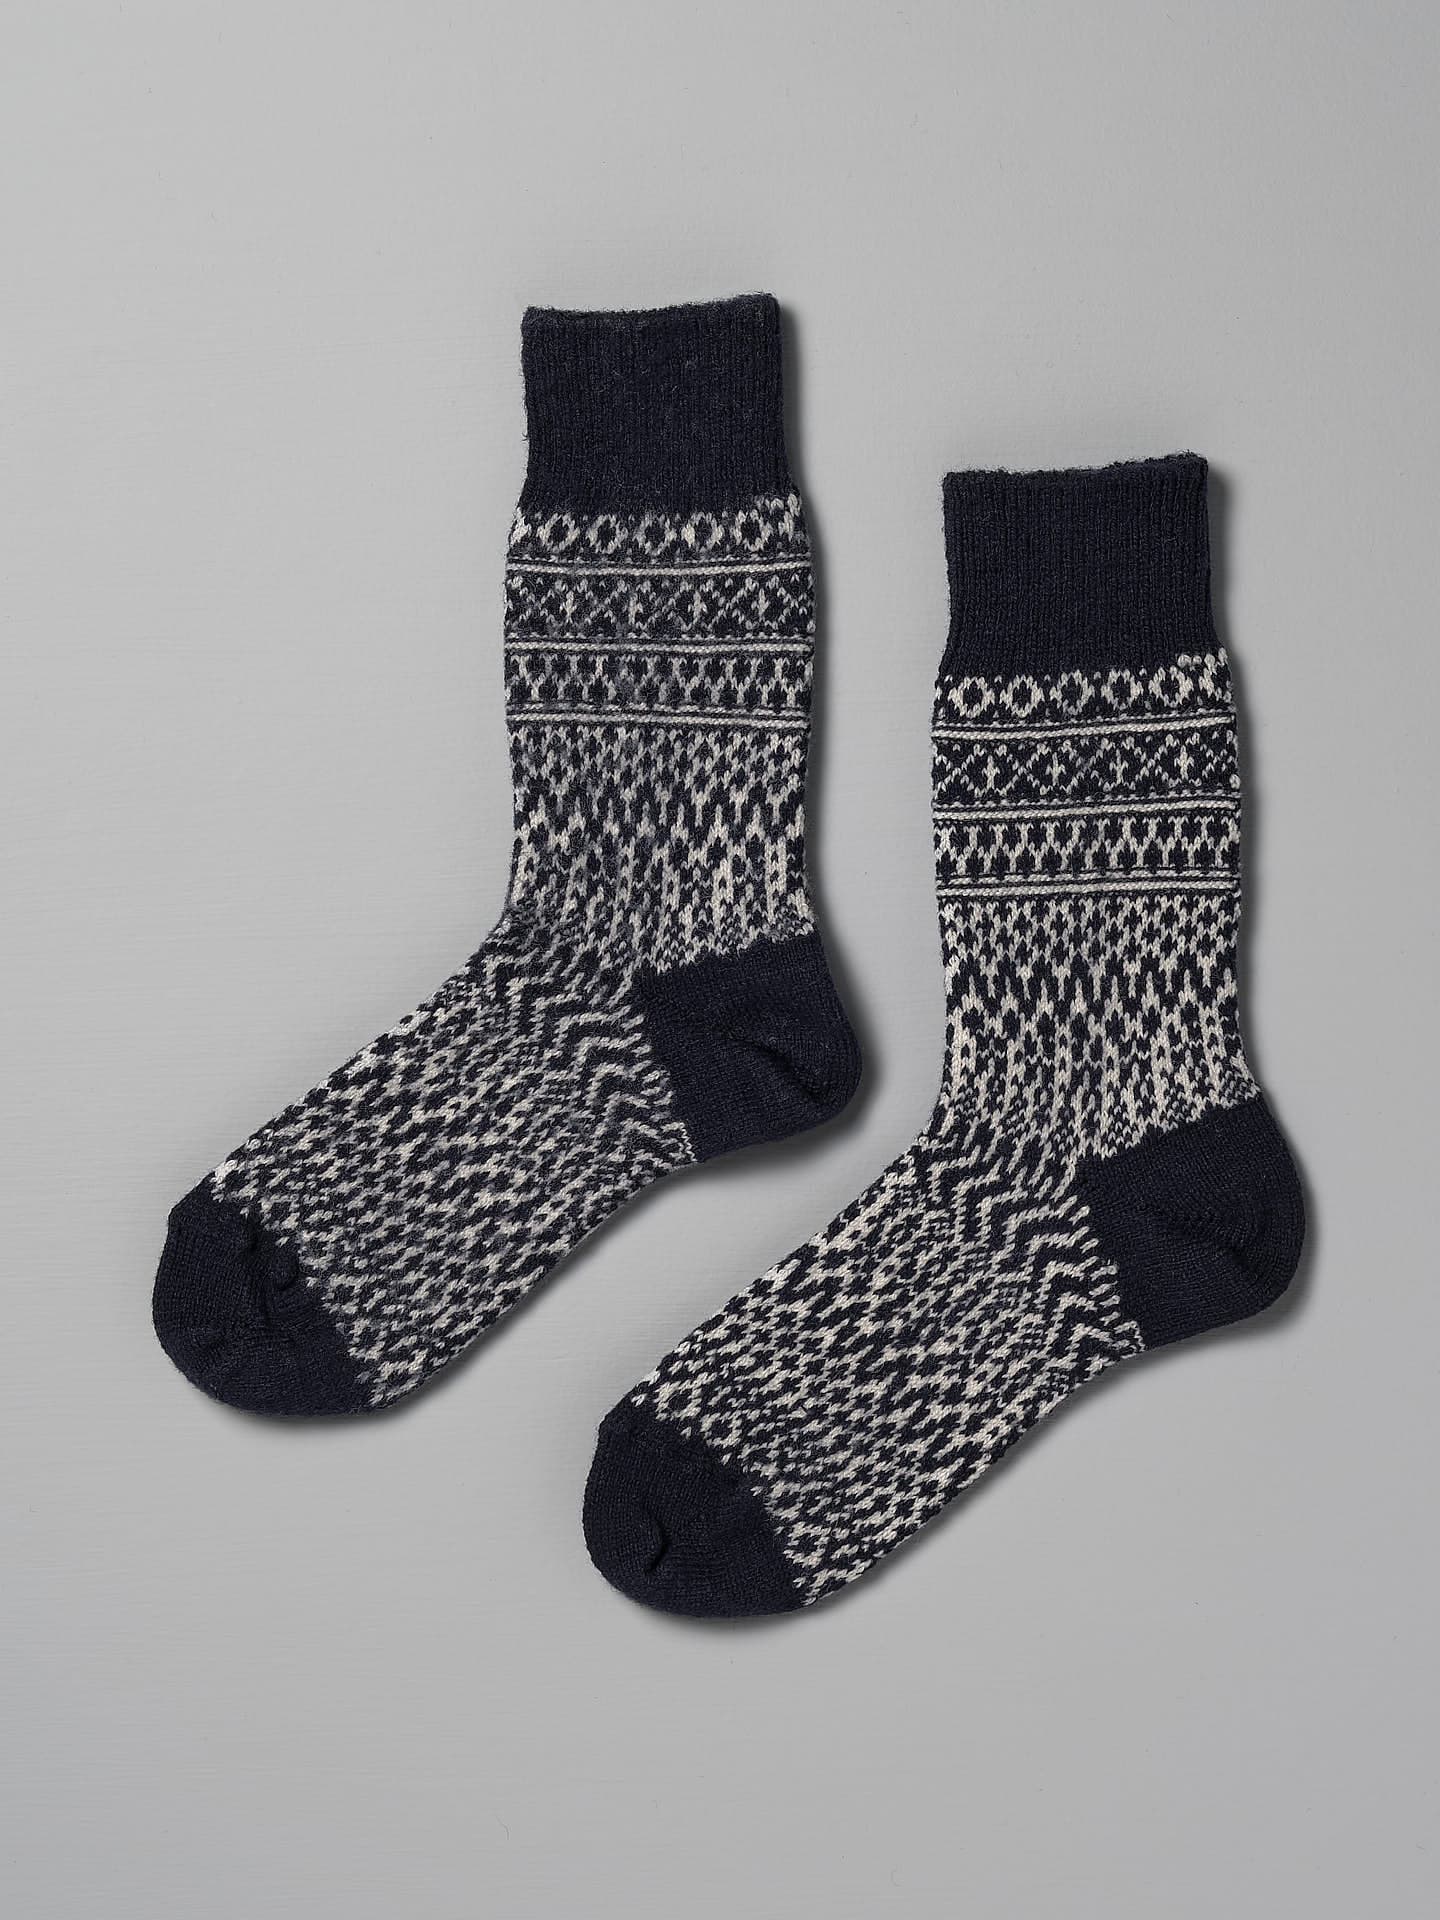 A pair of Oslo Wool Jacquard Socks – Navy by Nishiguchi Kutsushita, suitable for both women's and men's sizes, laid flat on a plain grey background.